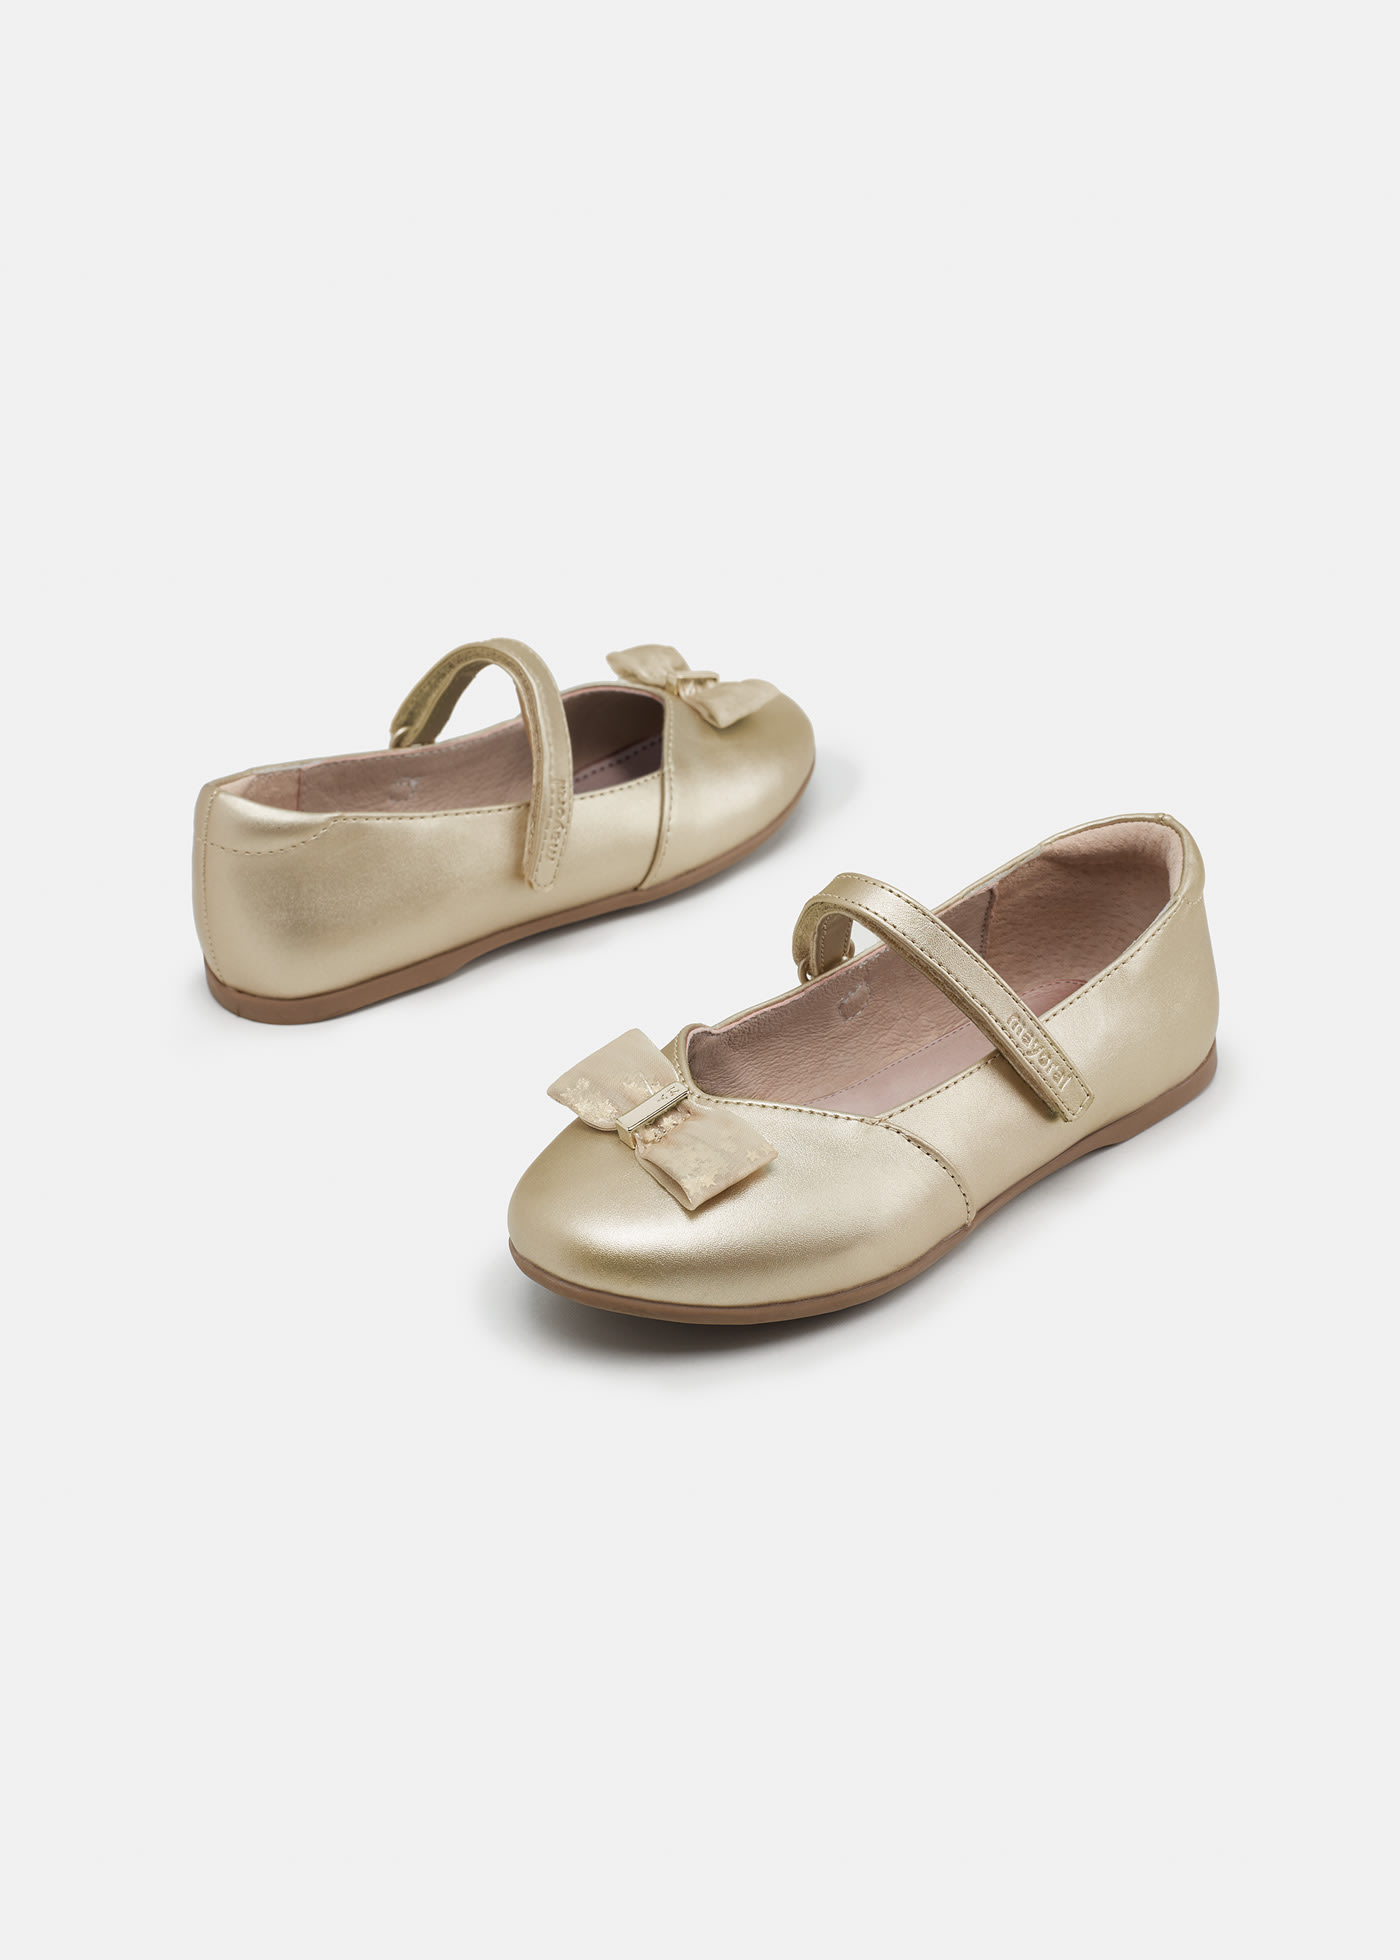 Bow mary janes sustainable leather girl